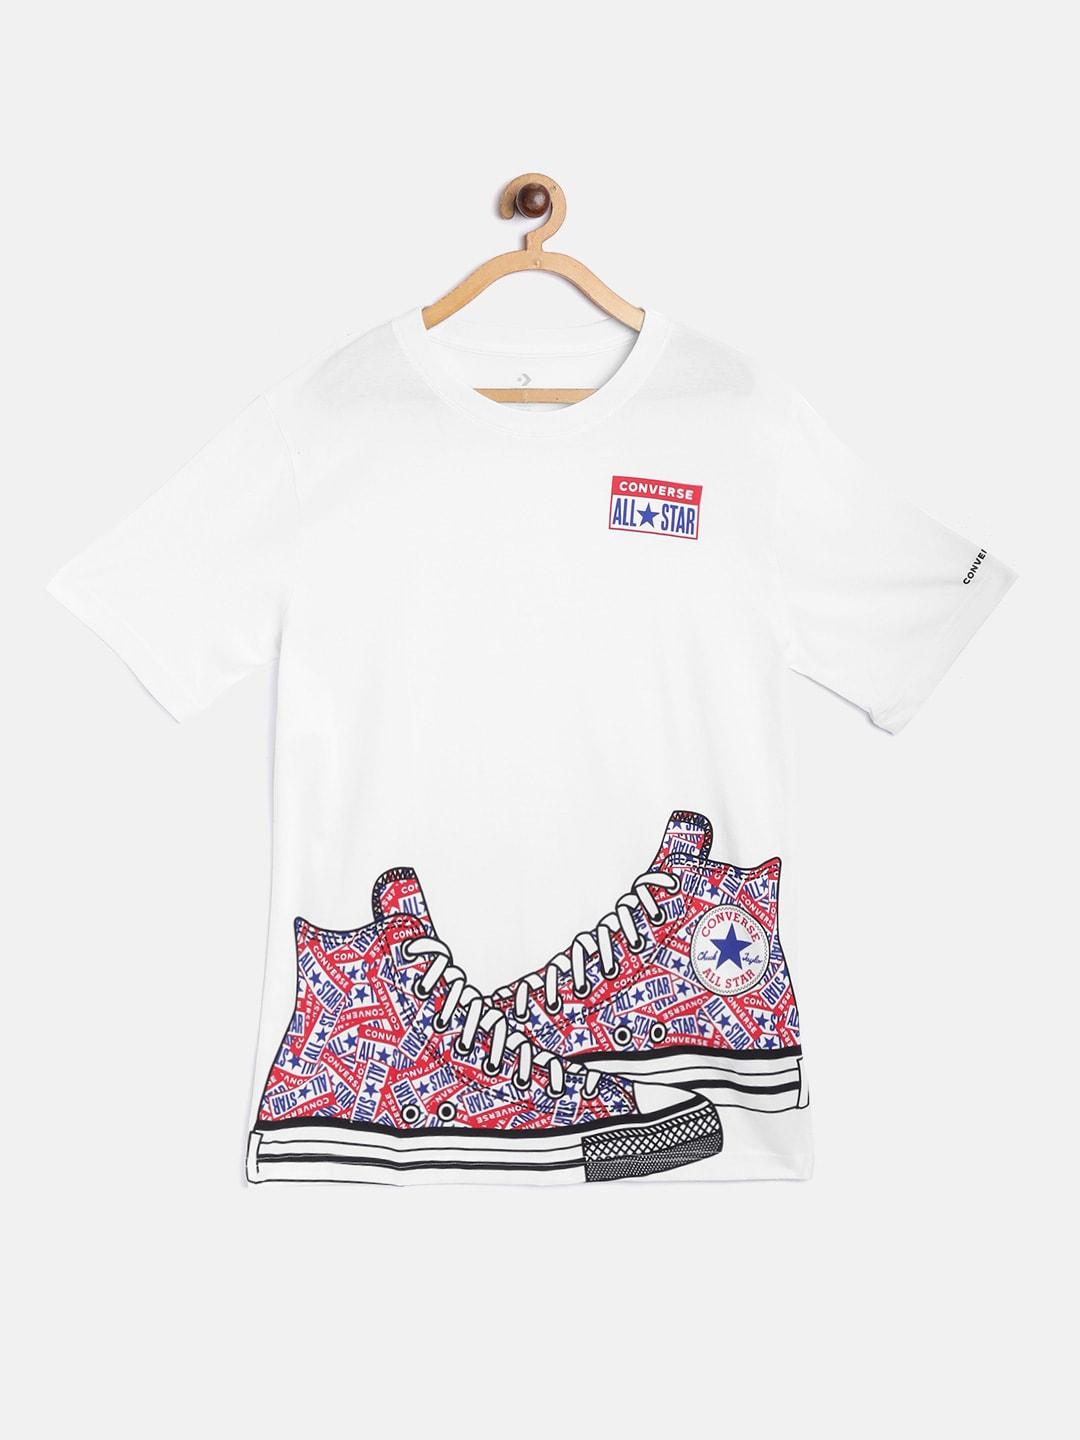 converse-boys-white--red-sneakers-print-round-neck-pure-cotton-t-shirt